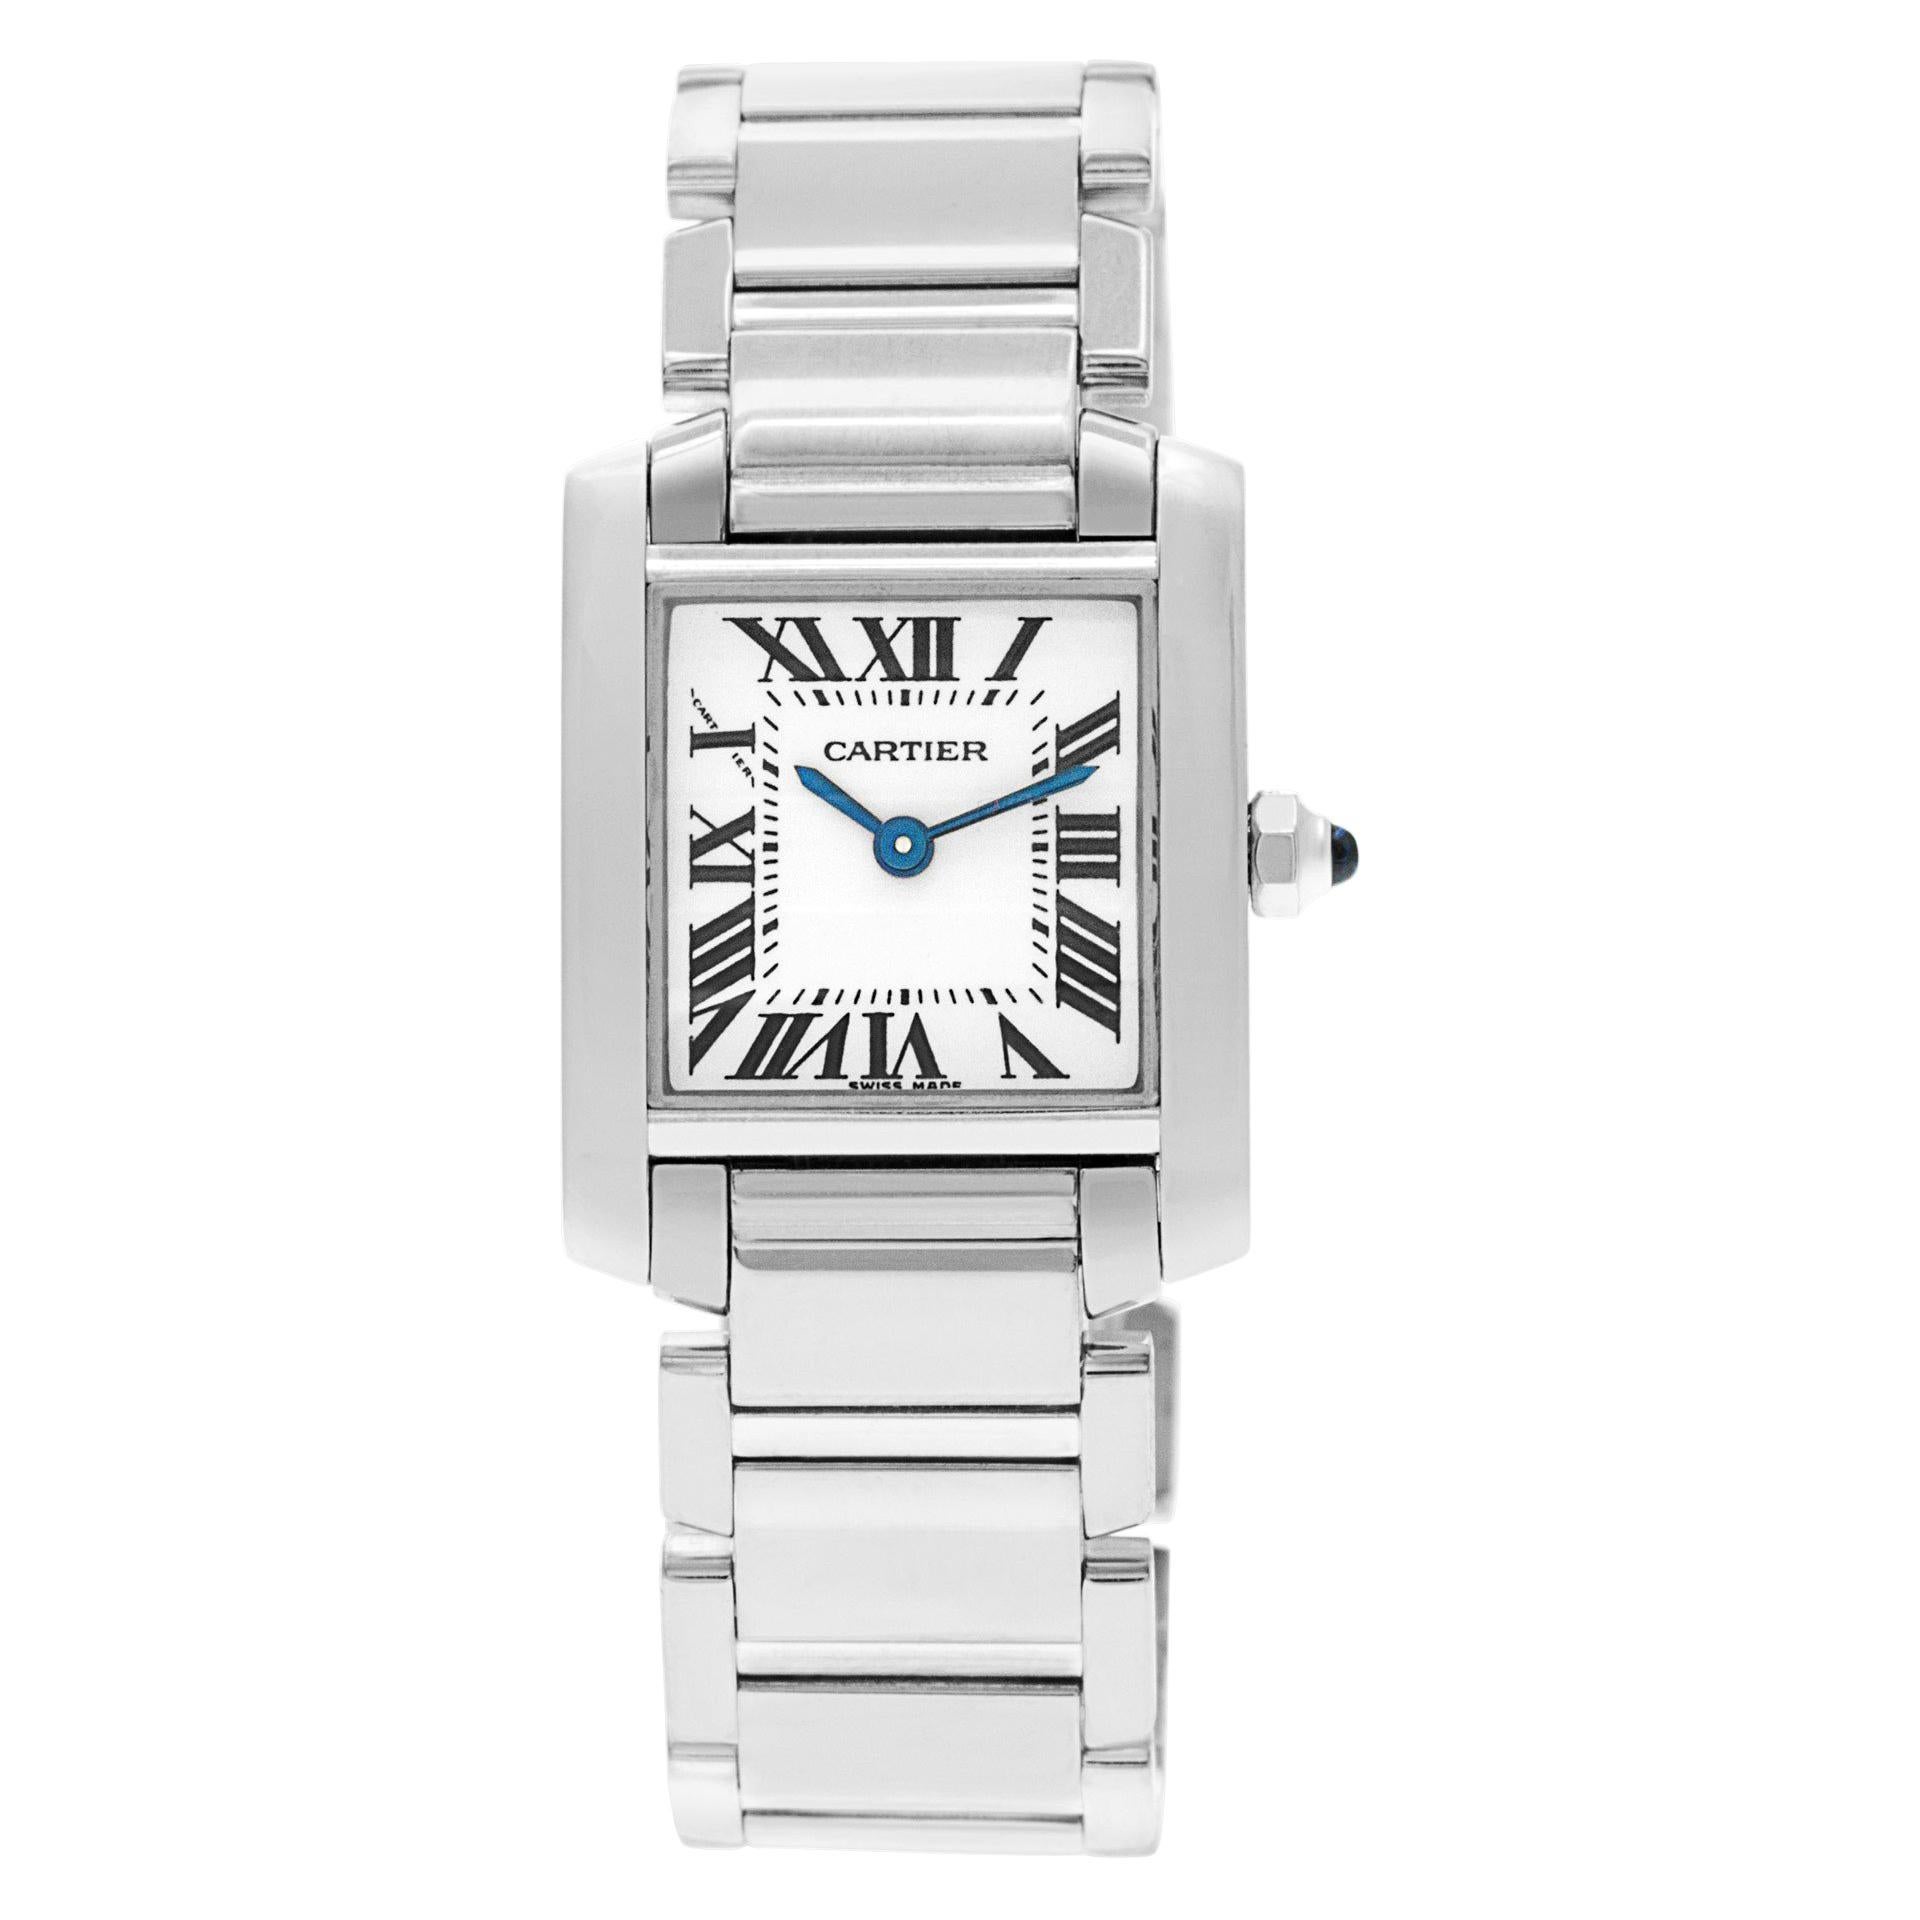 Certified Authentic Cartier Tank Francaise 16200, Black Dial For Sale